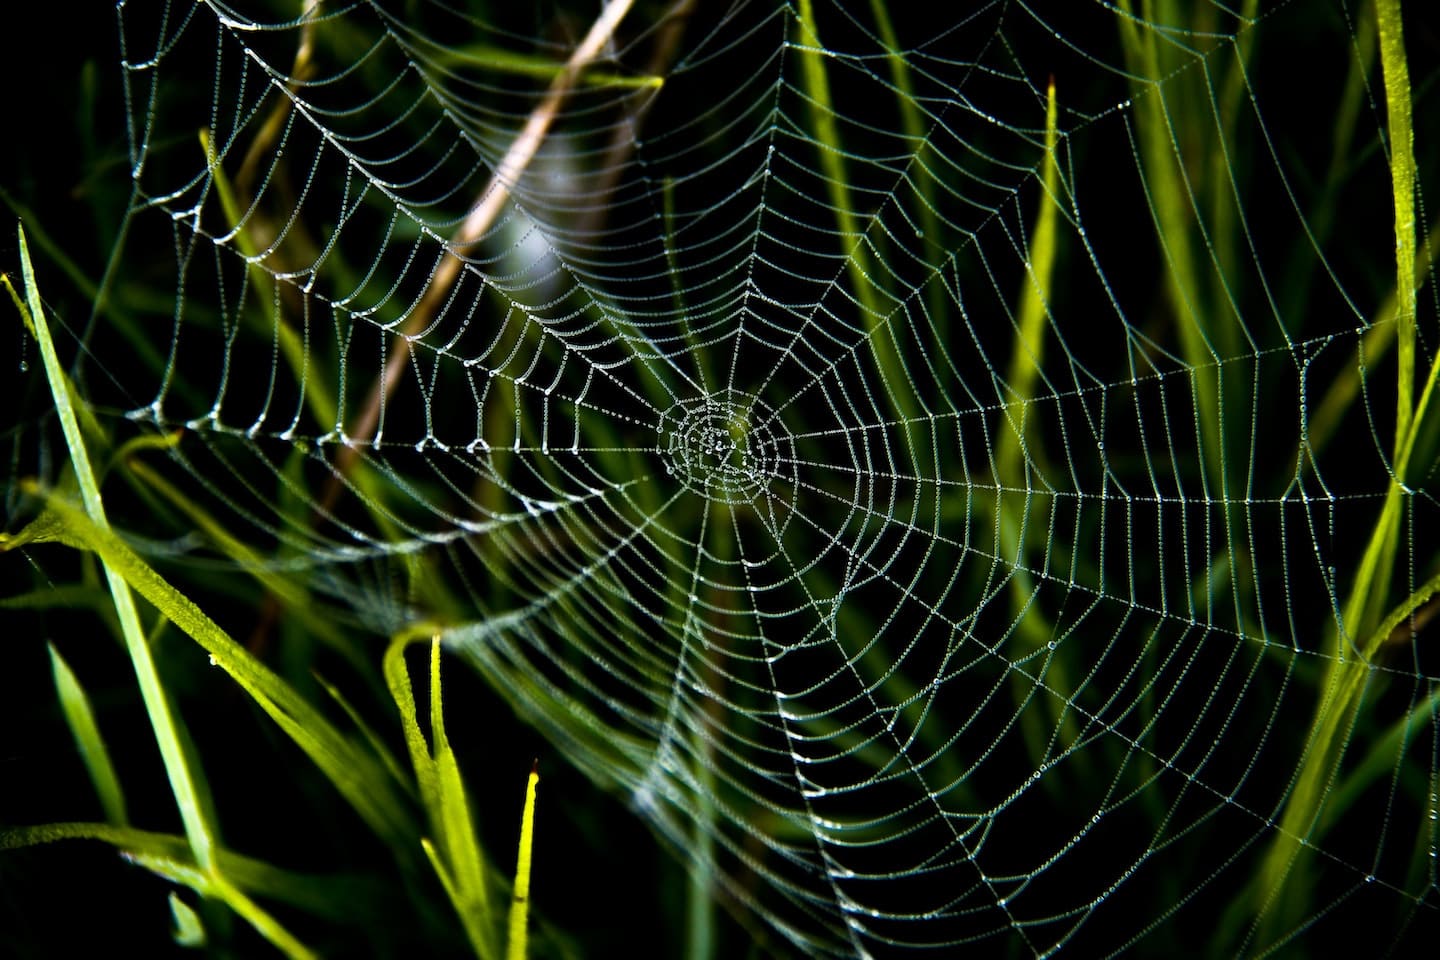 image of a spider web